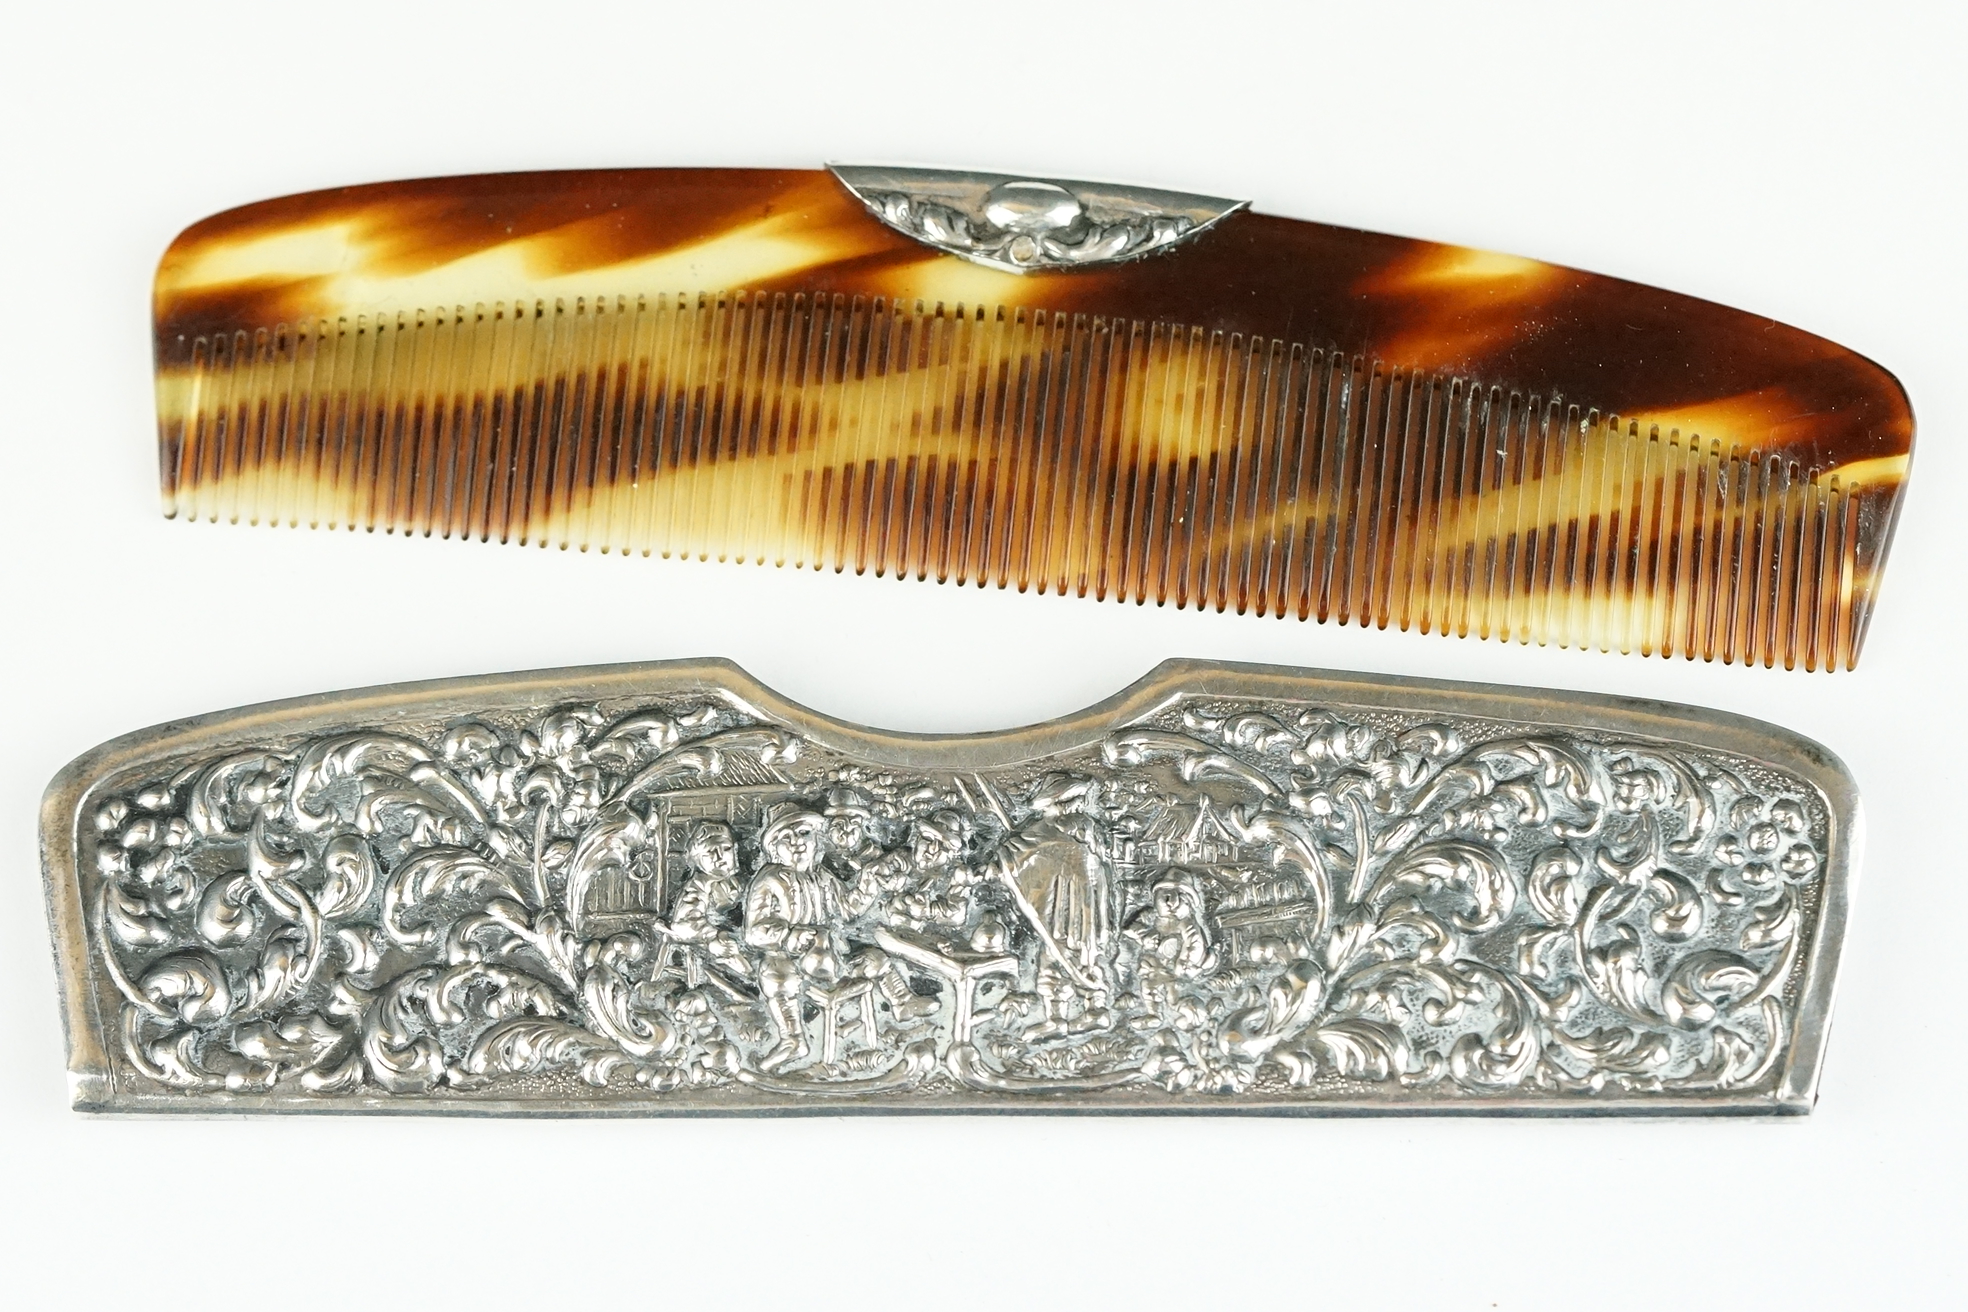 An antique sterling silver repoussé pattern hair comb and case.